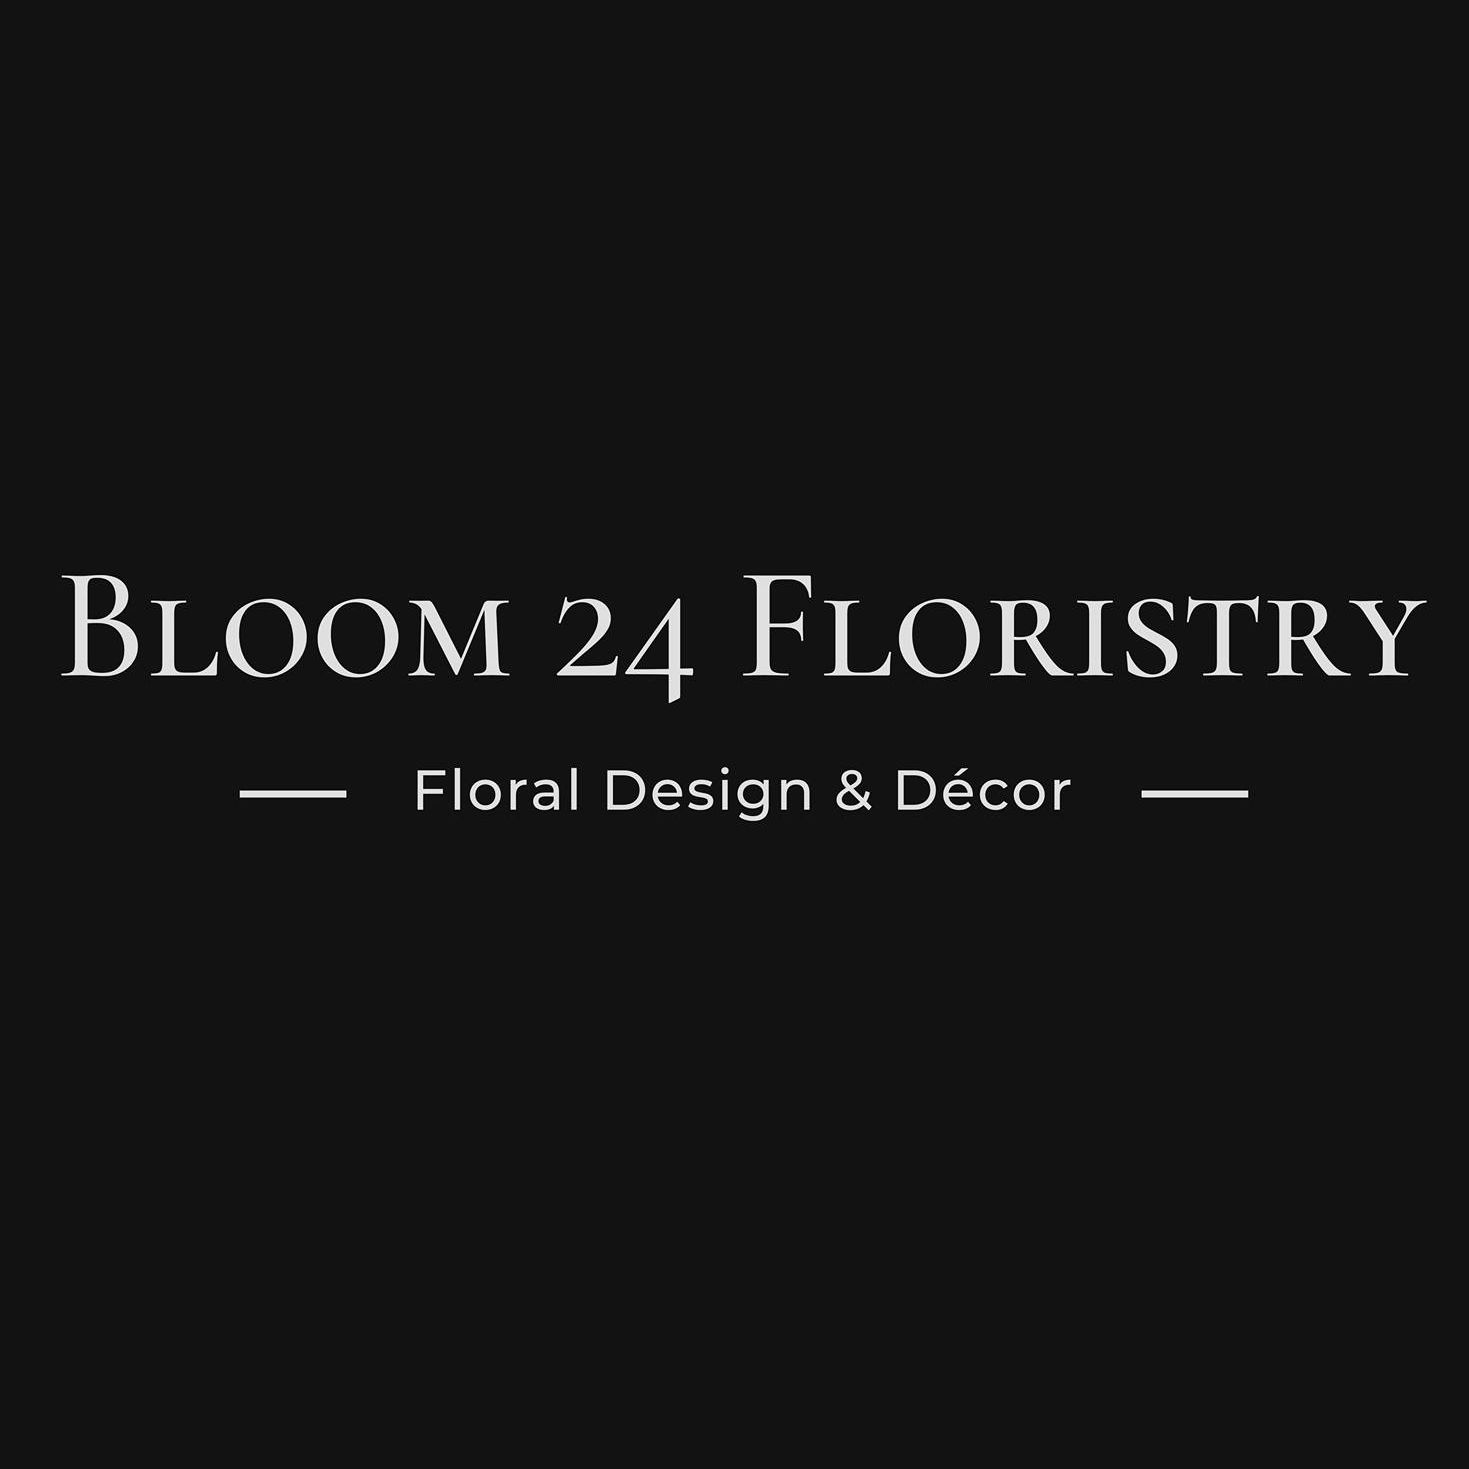 Plants Are Life, Flowers Are Celebration - Bloom 24 Floristry